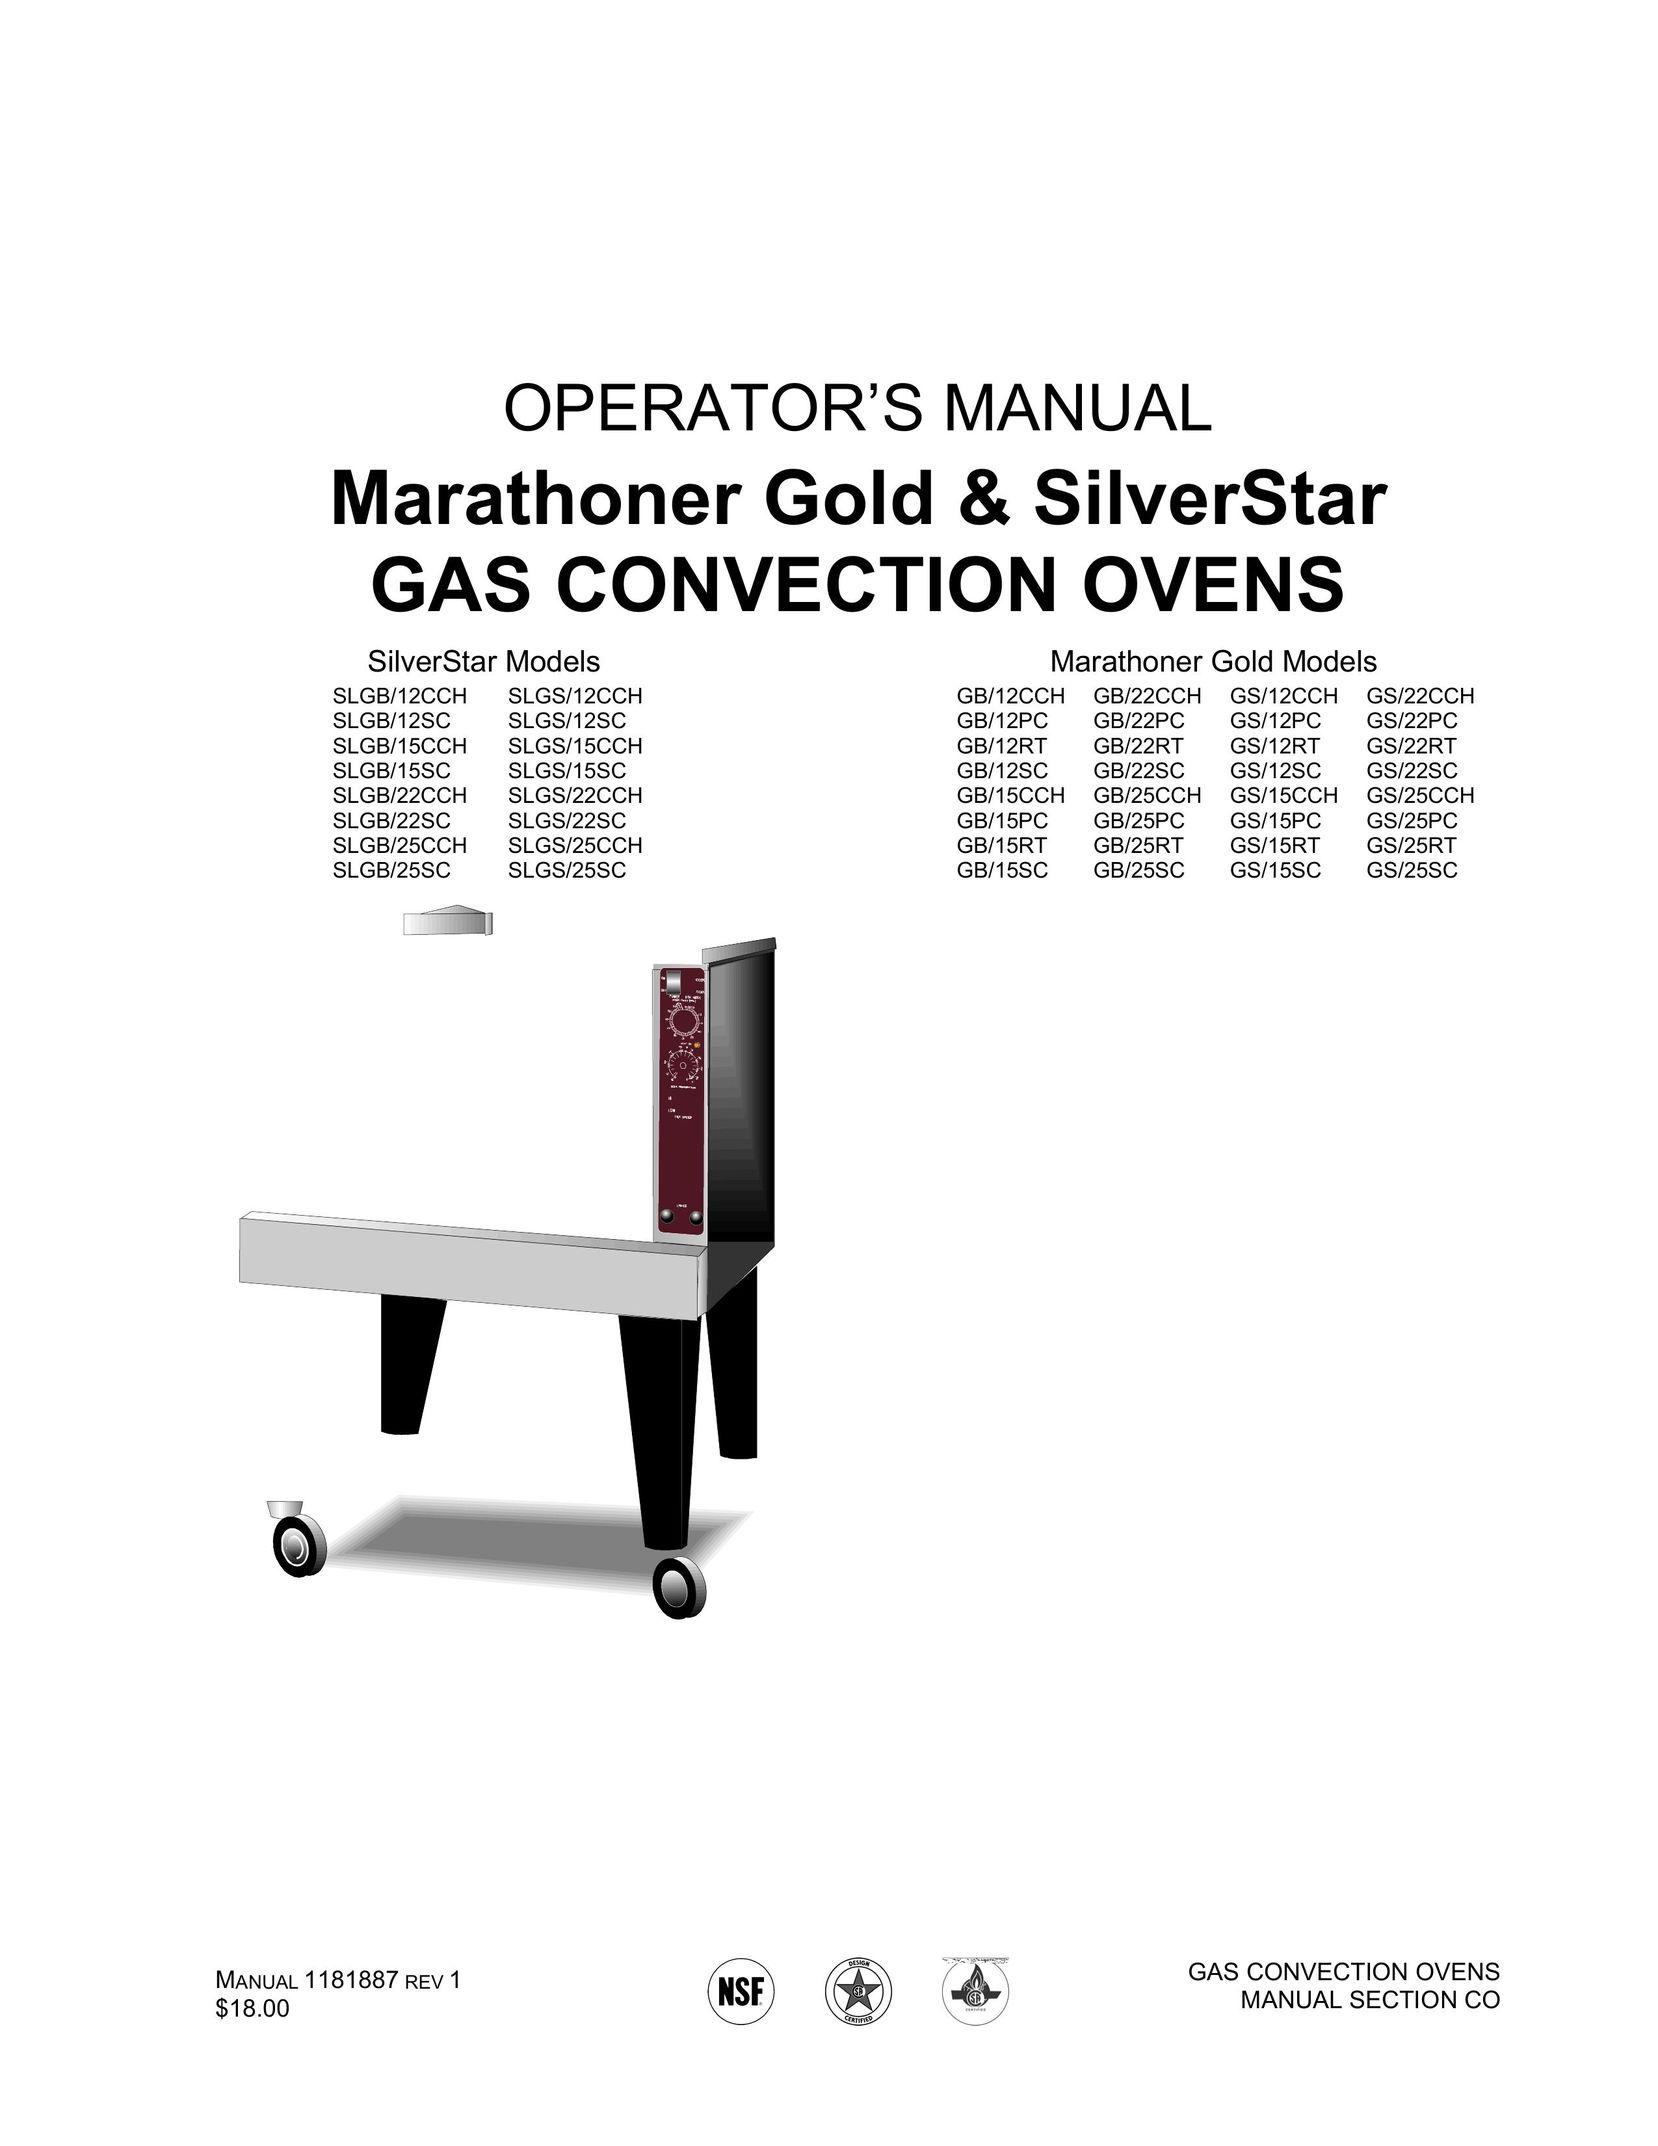 Southbend SLGB/12SC Oven User Manual